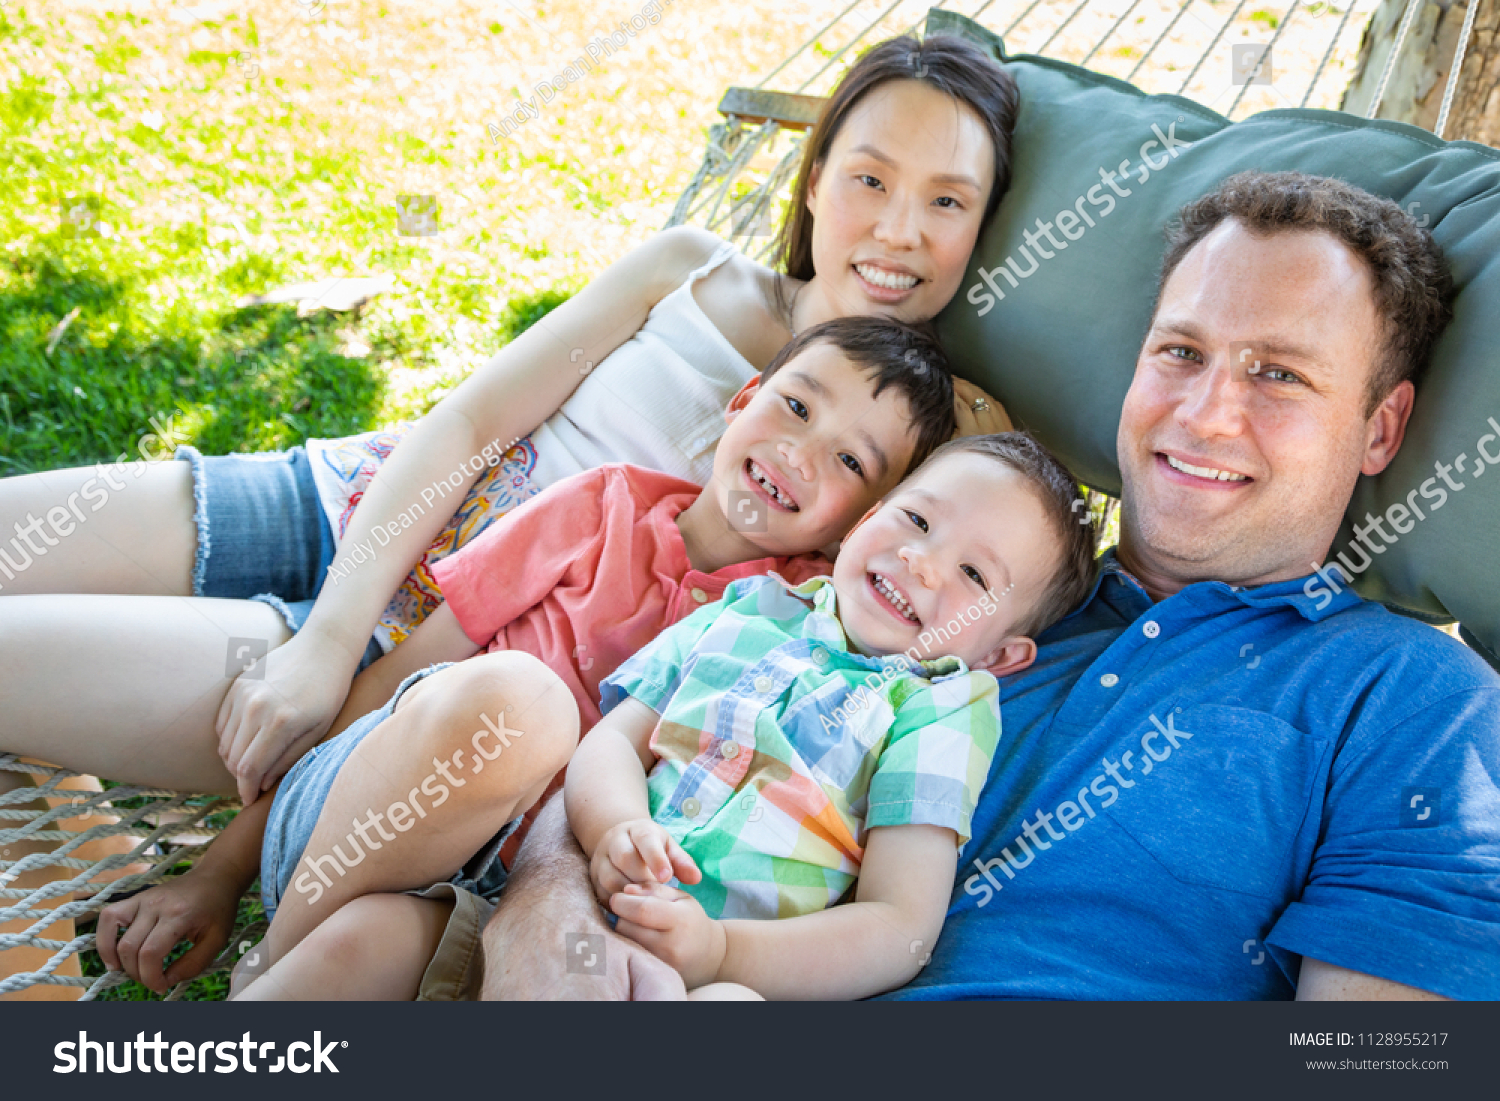 stock-photo-caucasian-father-and-chinese-mother-relaxing-in-hammock-with-mixed-race-sons-11289...jpg